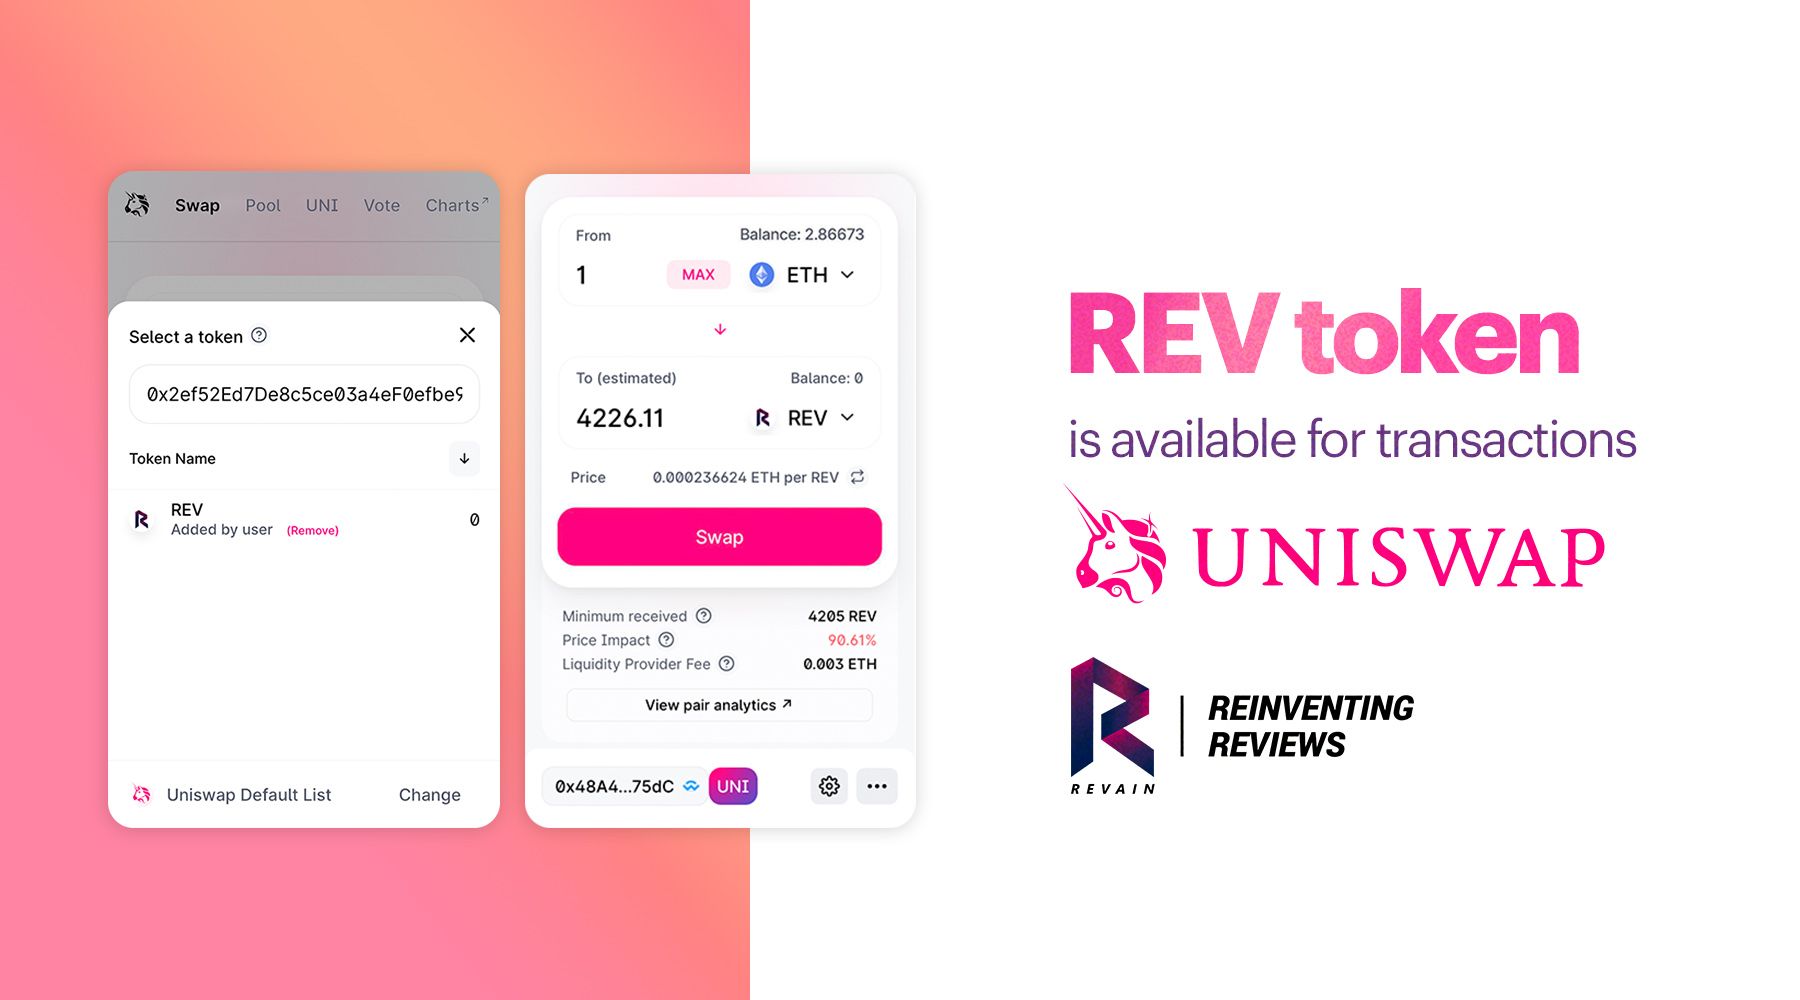 Article REV token is available for transactions on Uniswap